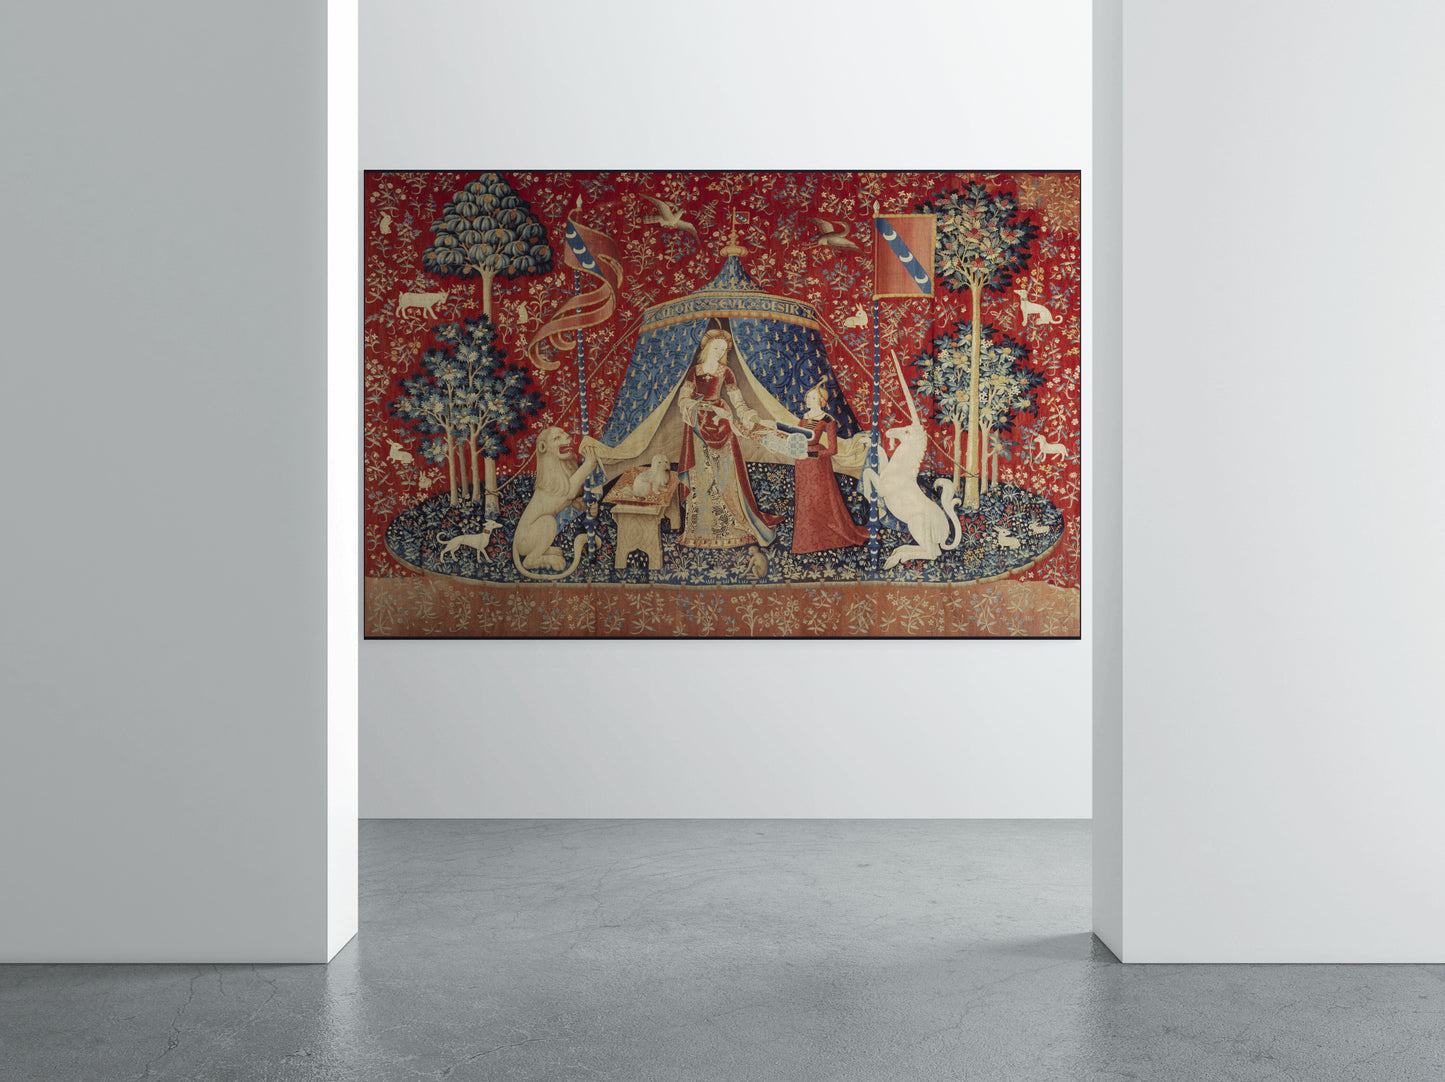 Medieval Tapestry Fabric Print of The Lady and the Unicorn La Dame à la licorne Mon Sol Desir "Desire" The Mona Lisa of the Middle Ages RE777978